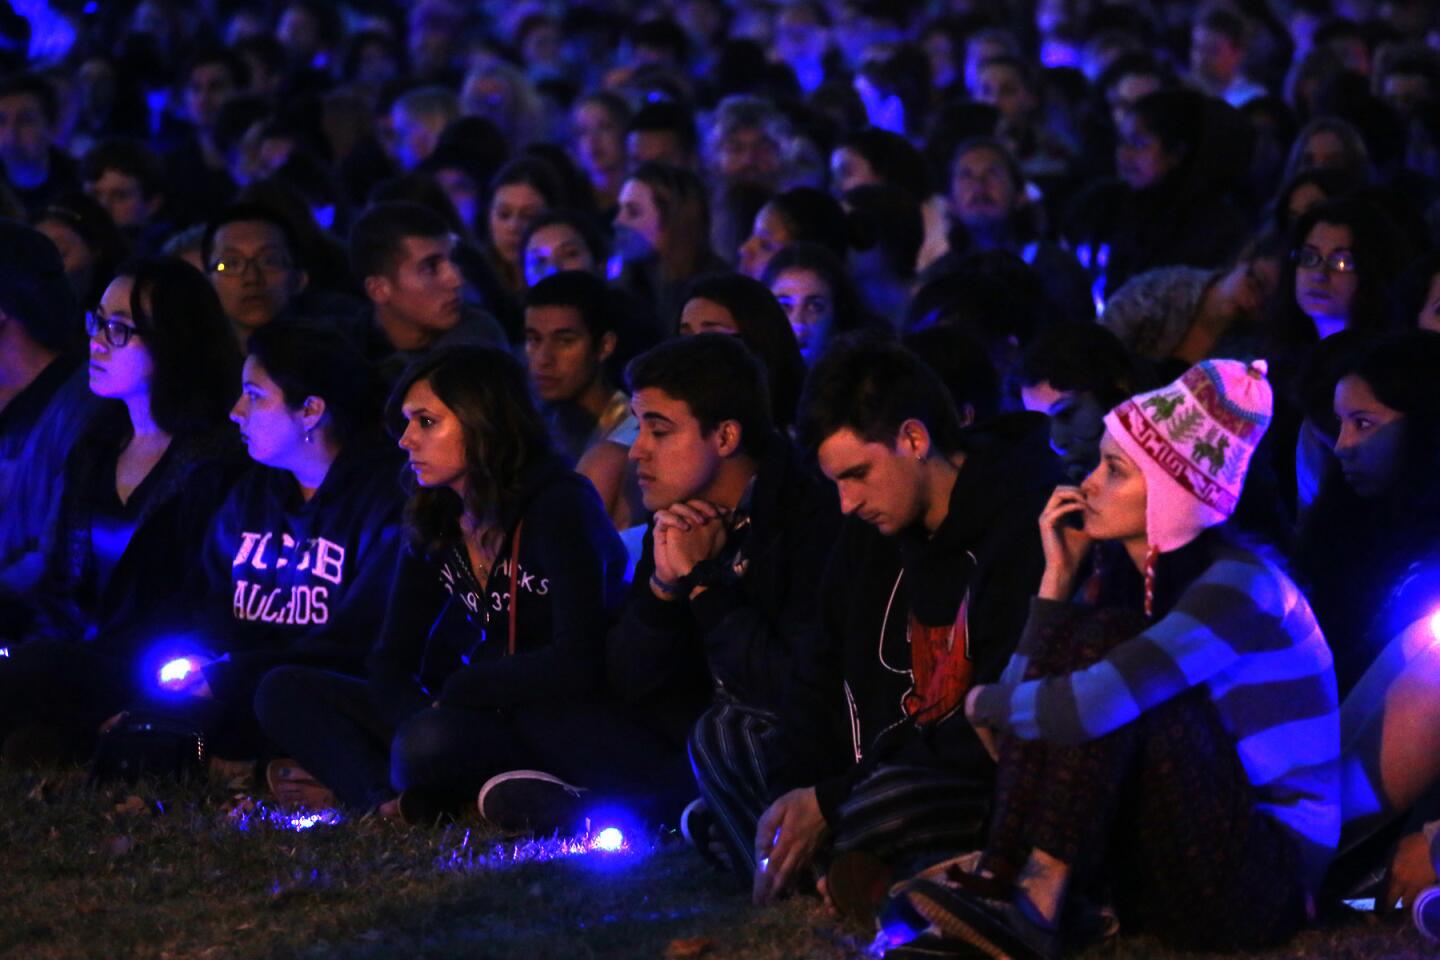 UC Santa Barbara students and residents listen during the memorial ceremony, which began at dusk on May 23.